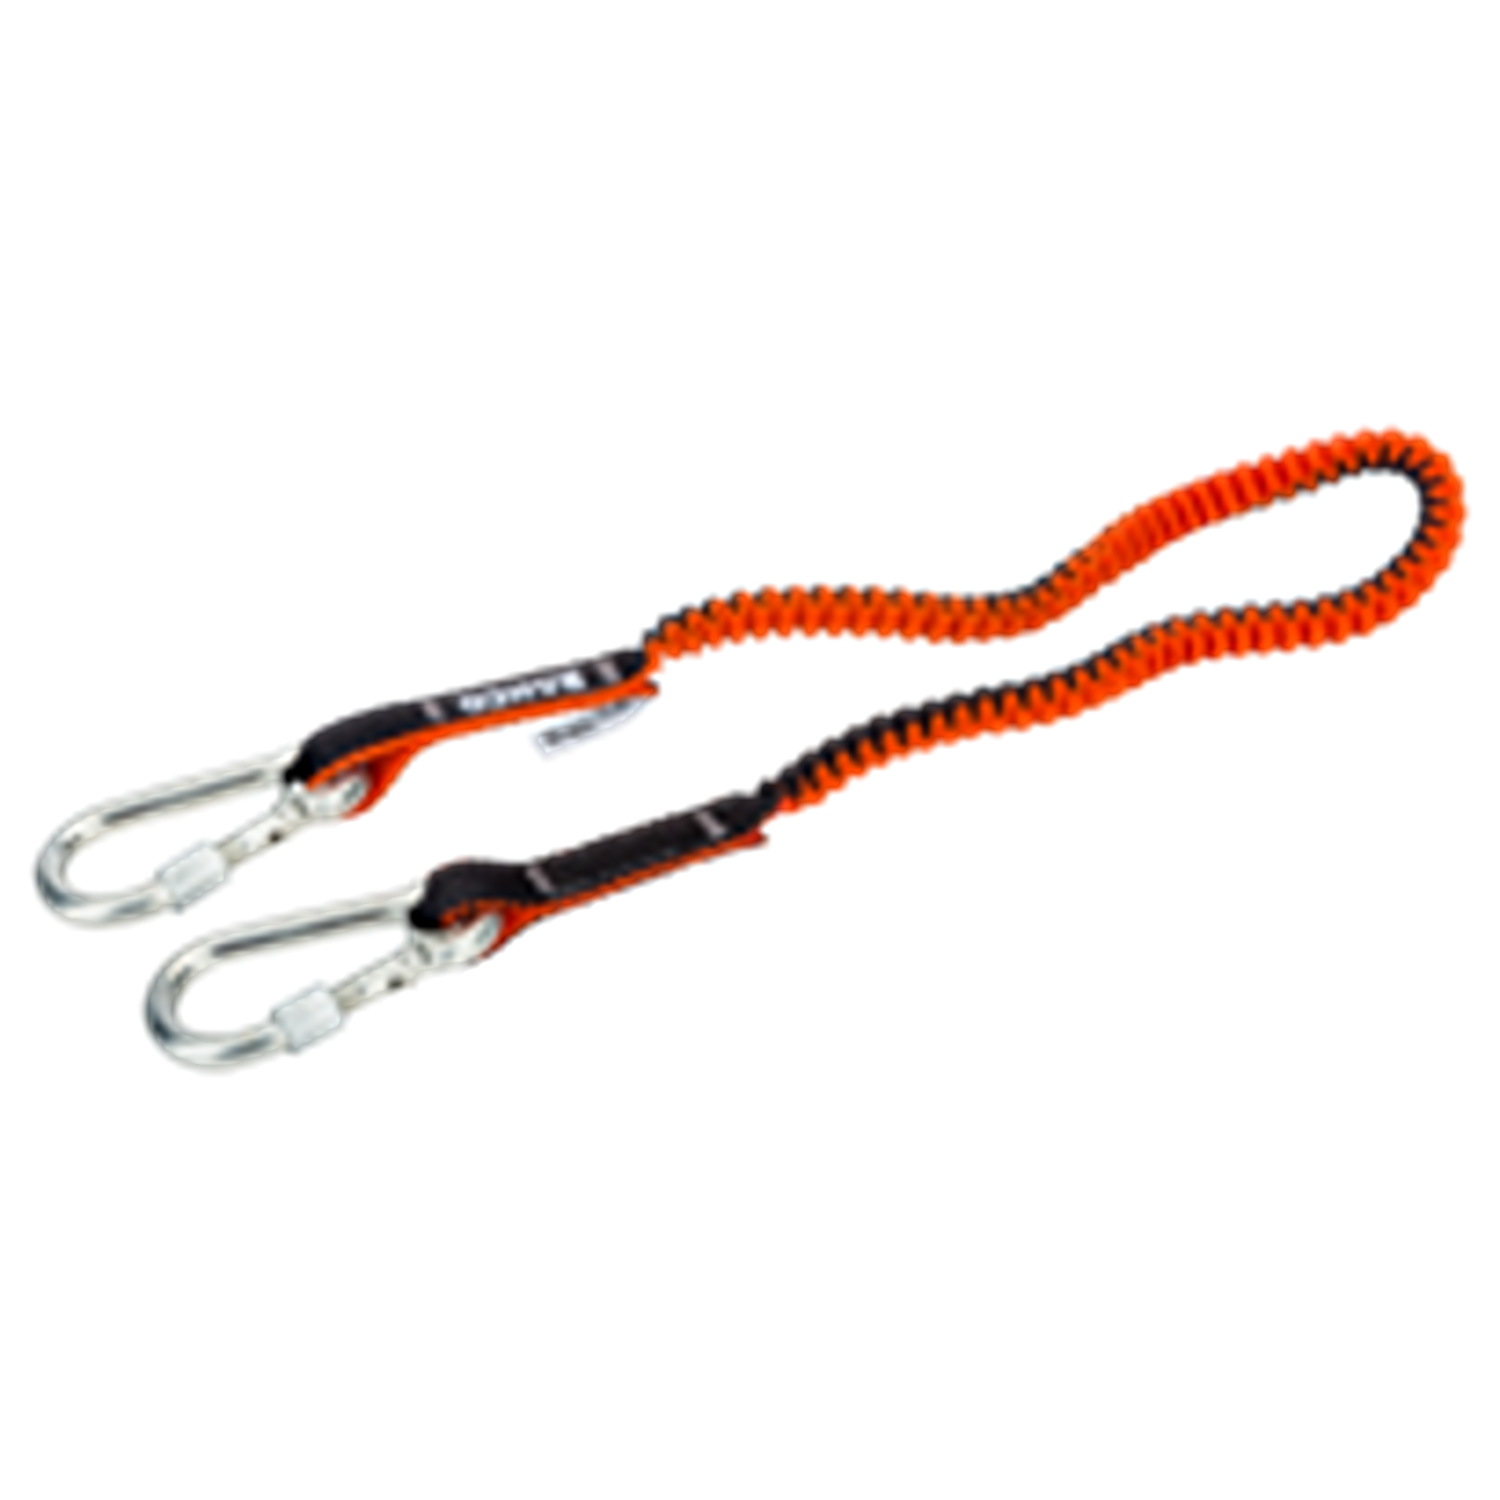 BAHCO 3875-LY4 Strap Lanyard with Locking Device 3 kg - Premium Lanyard from BAHCO - Shop now at Yew Aik.